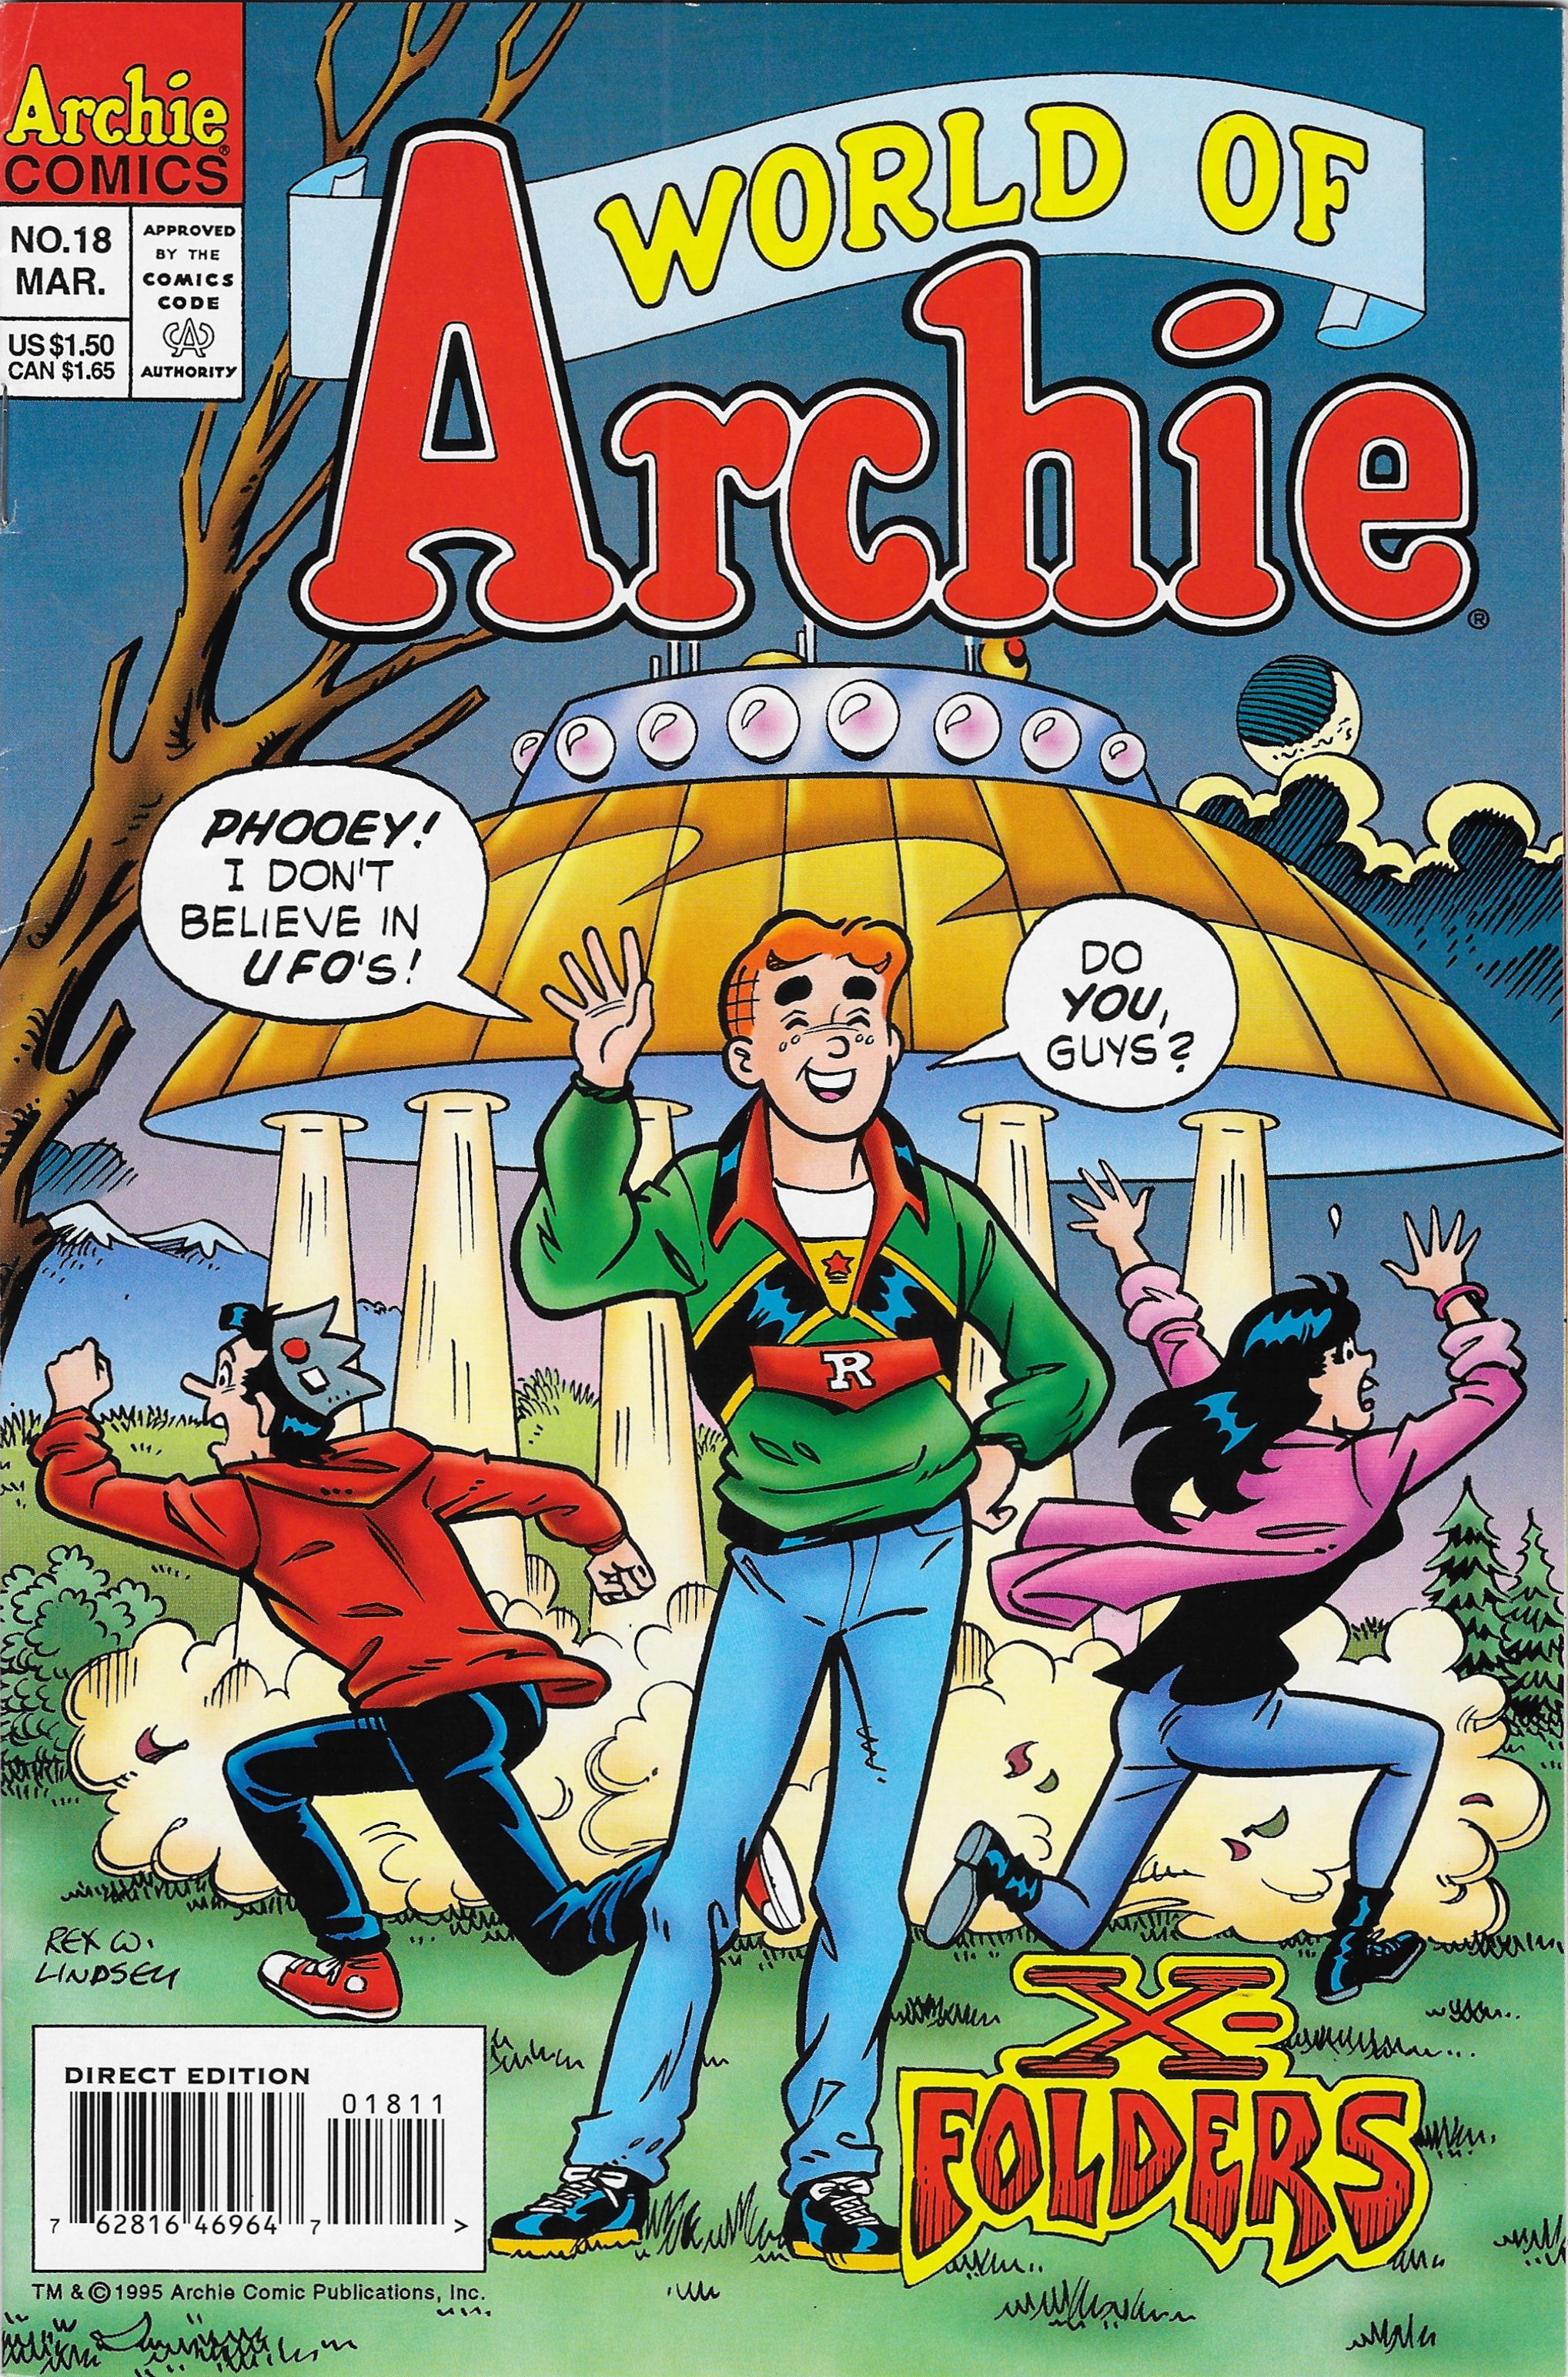 Read online World of Archie comic -  Issue #18 - 1